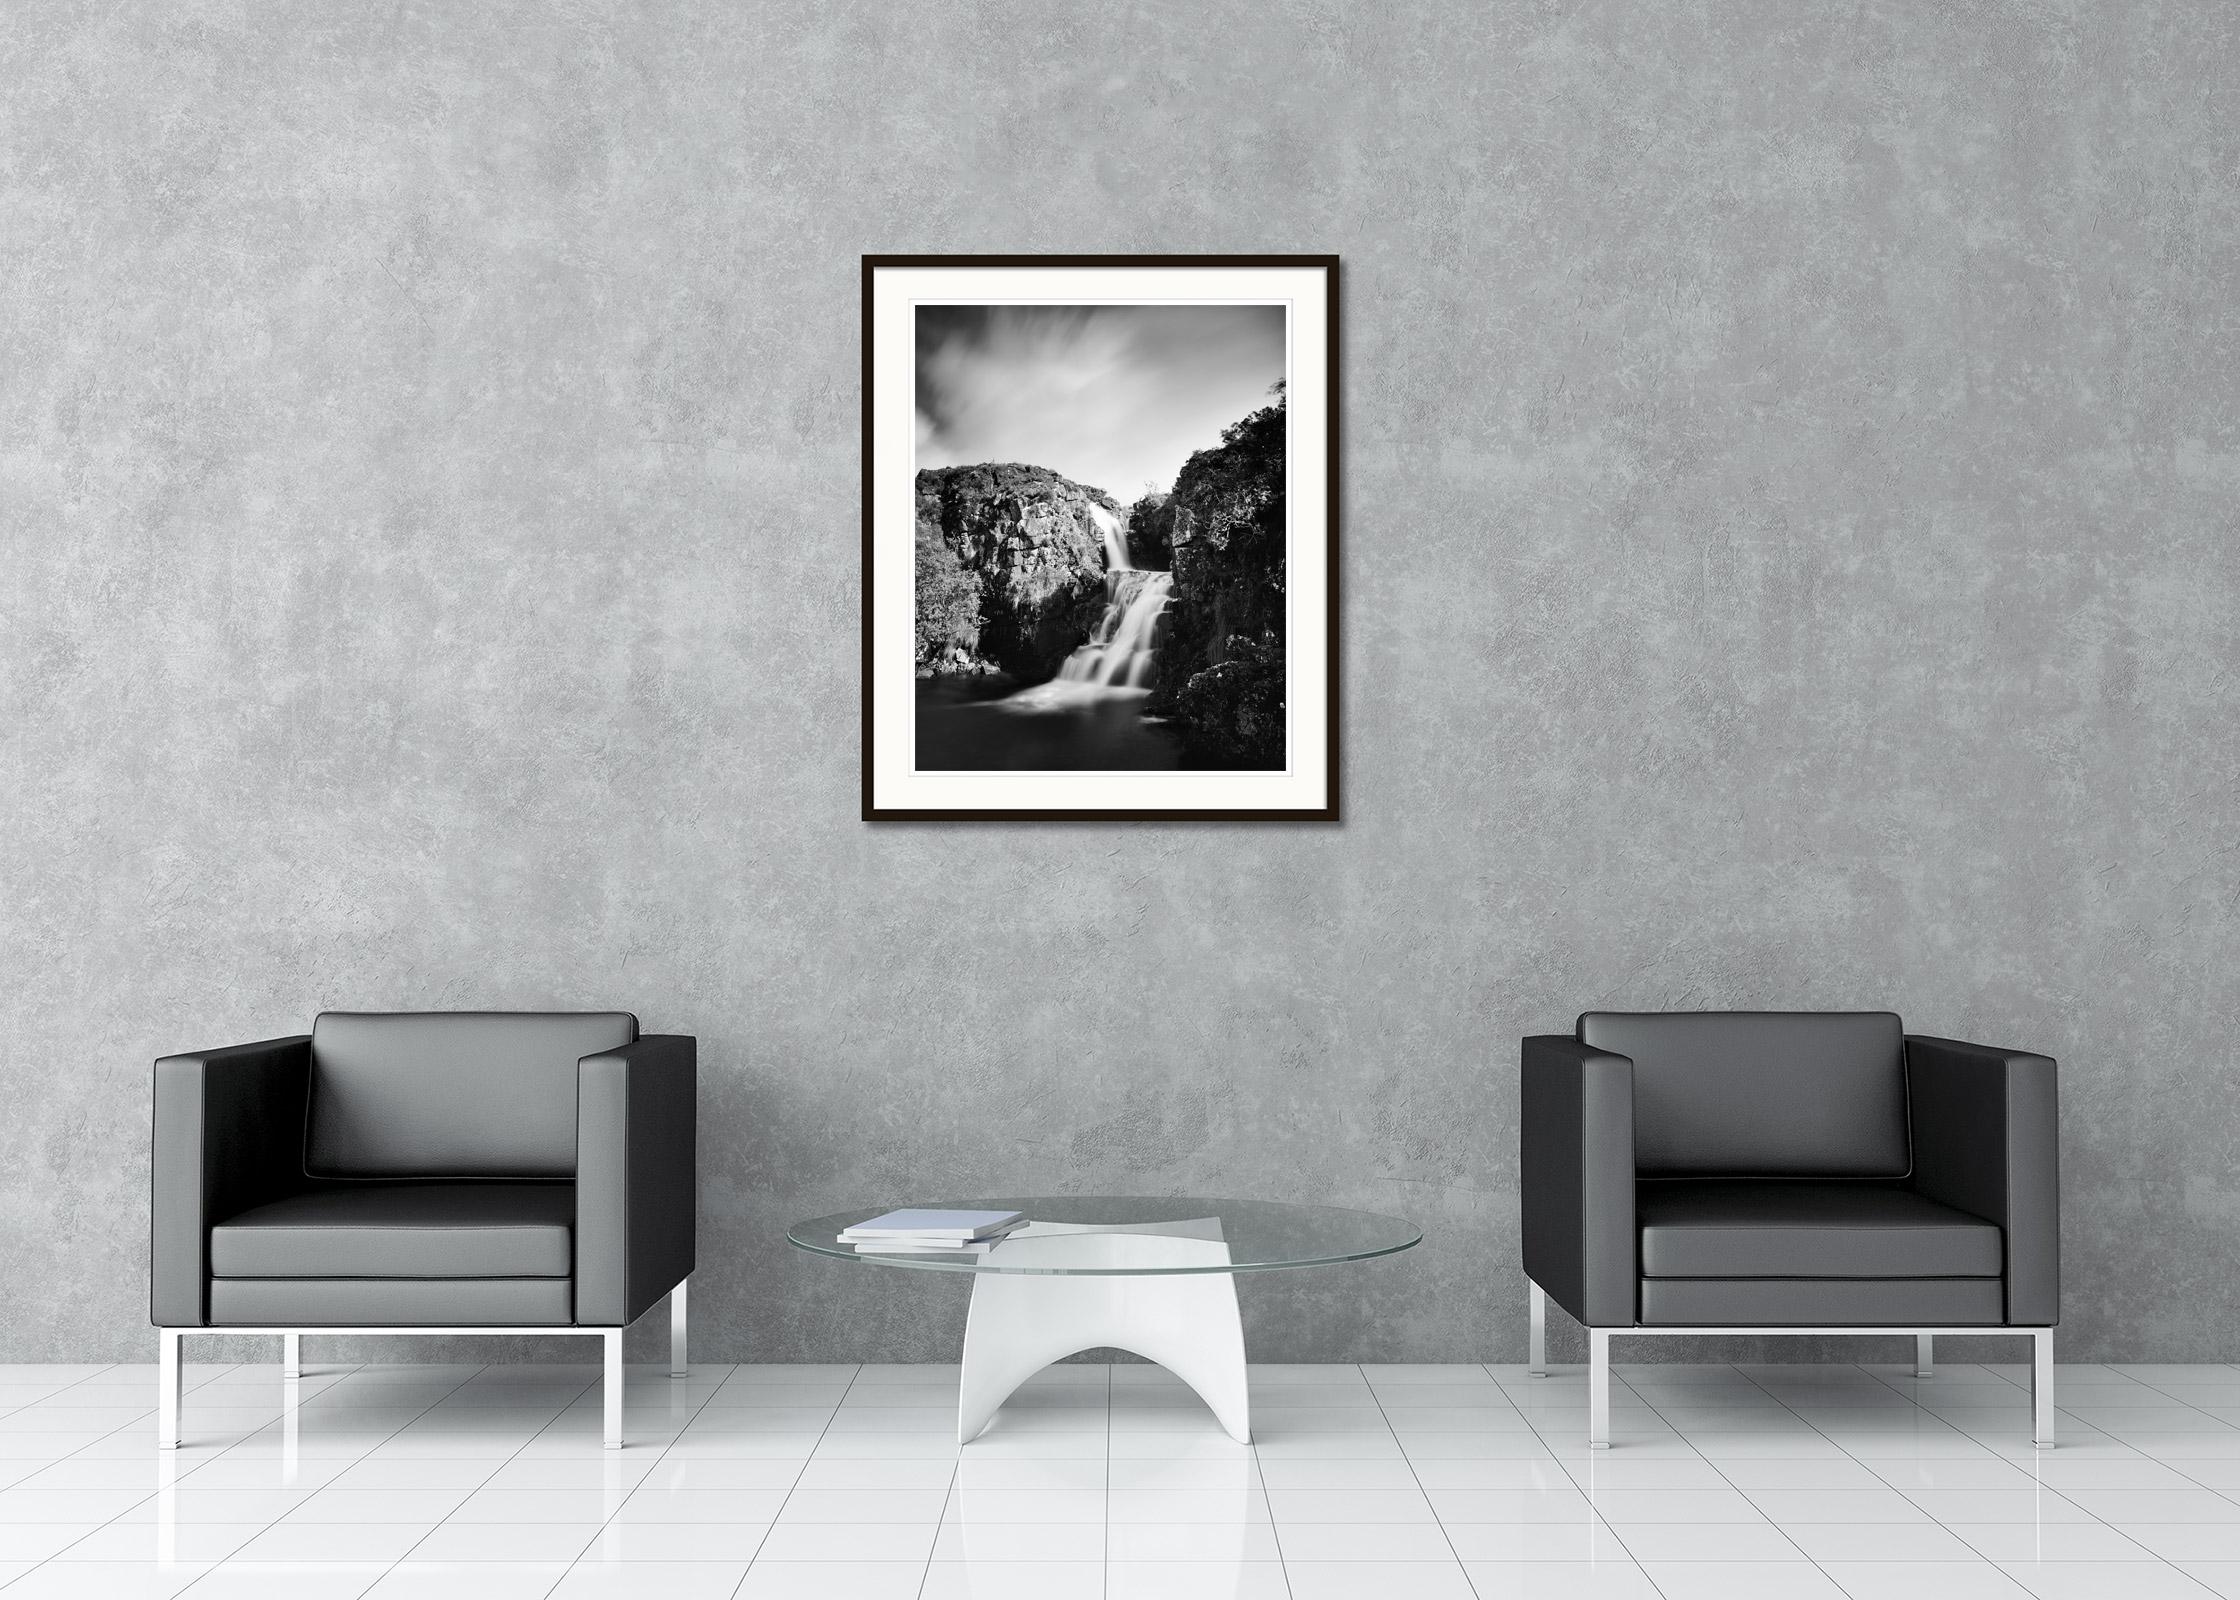 Black and white fine art long exposure waterscape - landscape photography. Mountain stream with waterfall in the Scottish highlands. Archival pigment ink print, edition of 7. Signed, titled, dated and numbered by artist. Certificate of authenticity